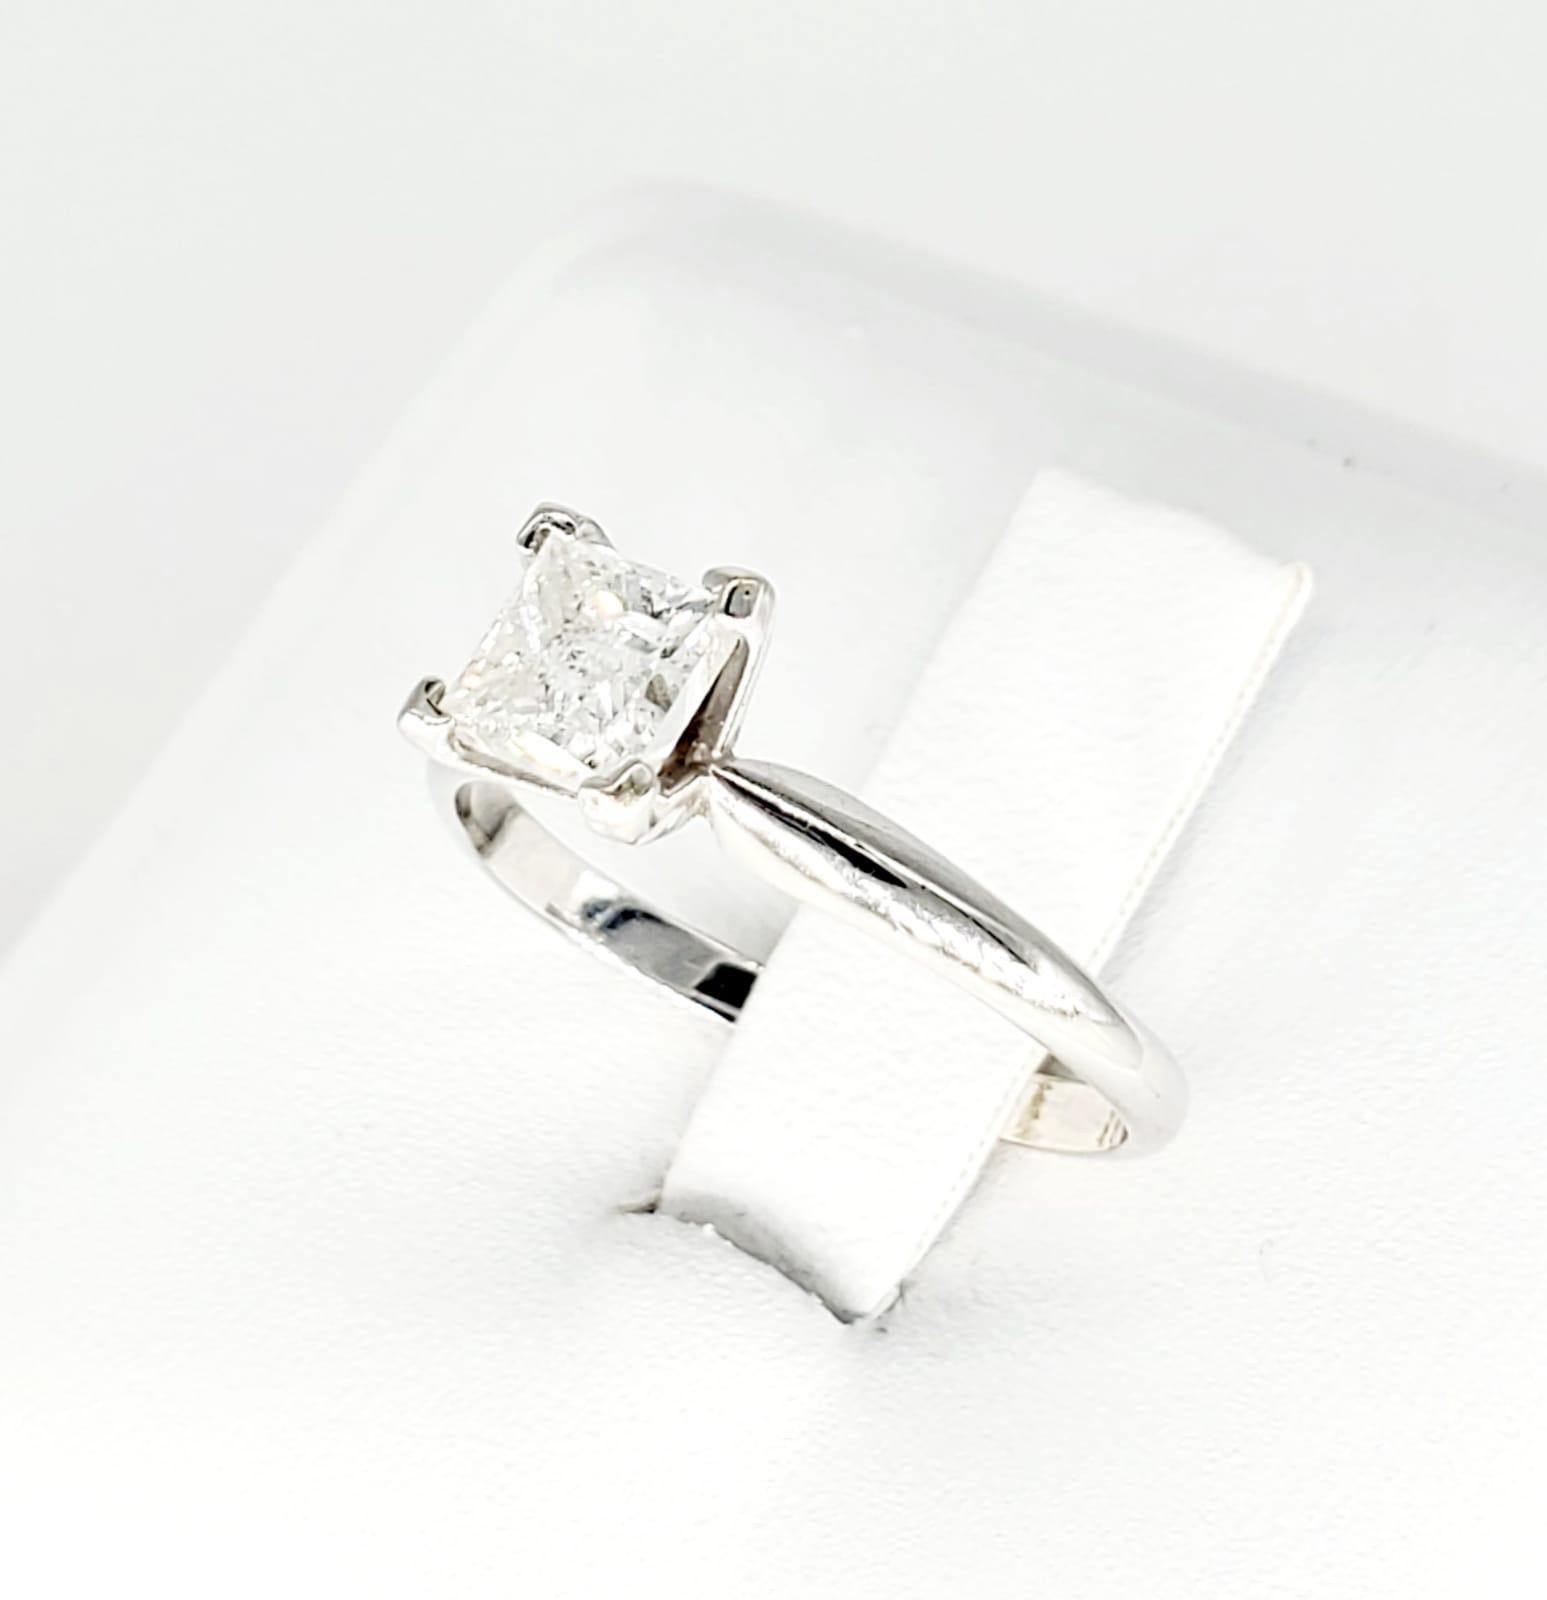 14k White Gold 0.75 Carat Princess Cut Diamond Solitaire Ring. The Diamonds clarity clarity I/H and is a size 6.5